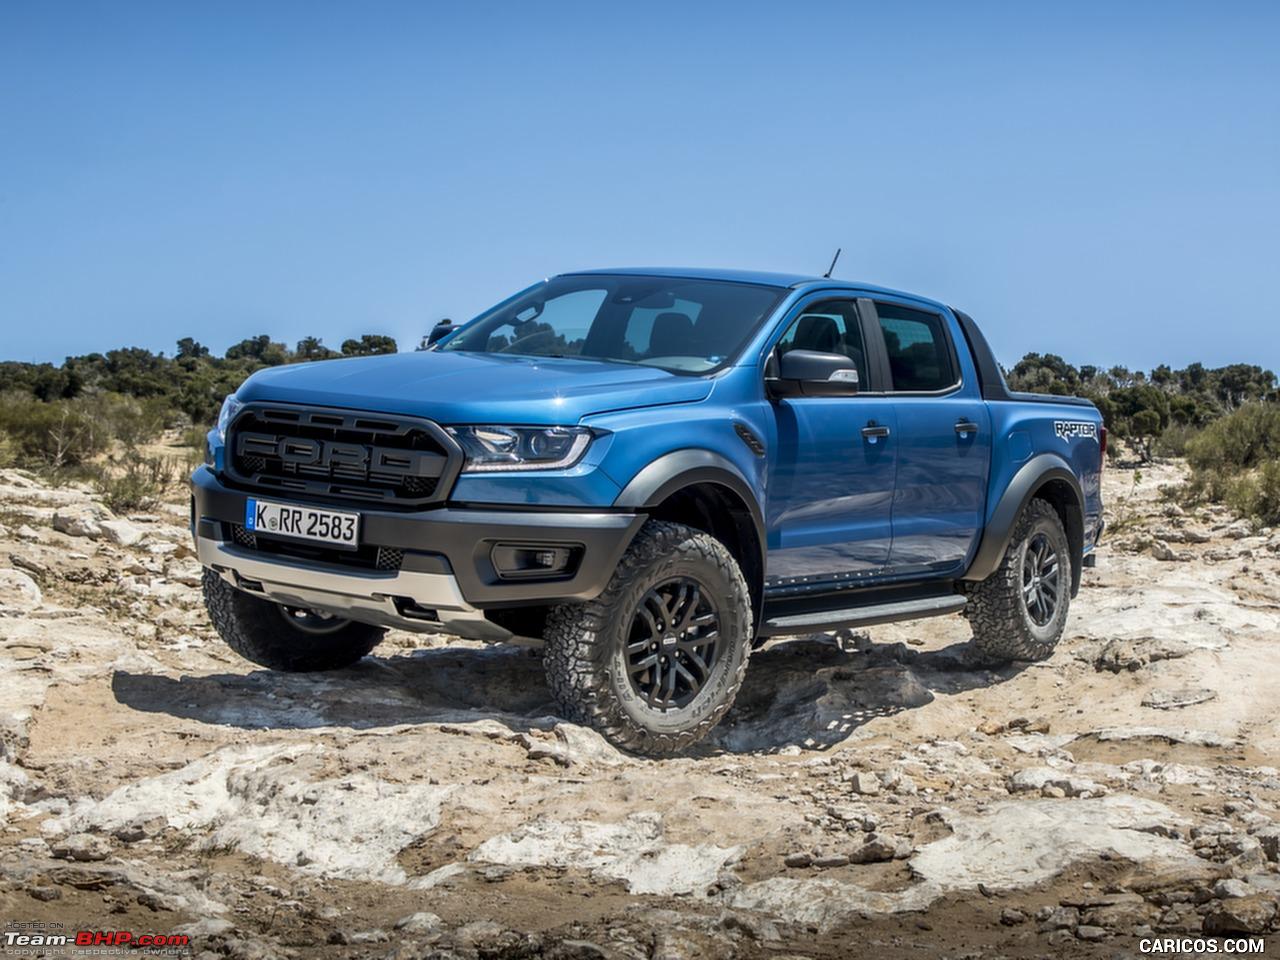 Pic: Ford Ranger pickup truck spied in India - Team-BHP